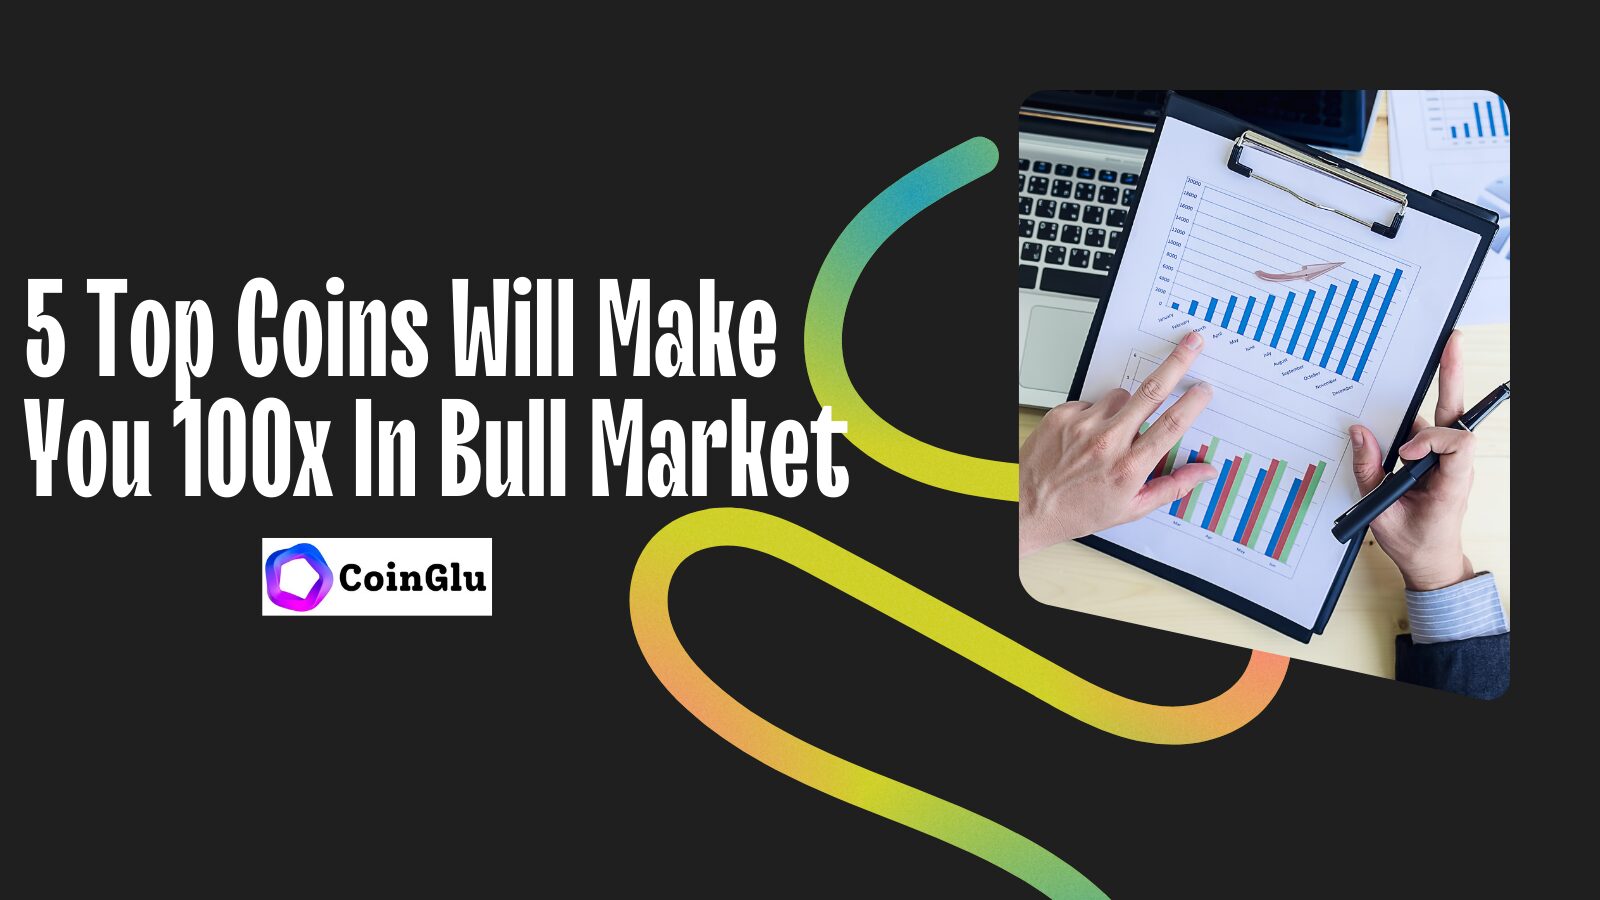 5 Top Coins Will Make You 100x In Bull Market